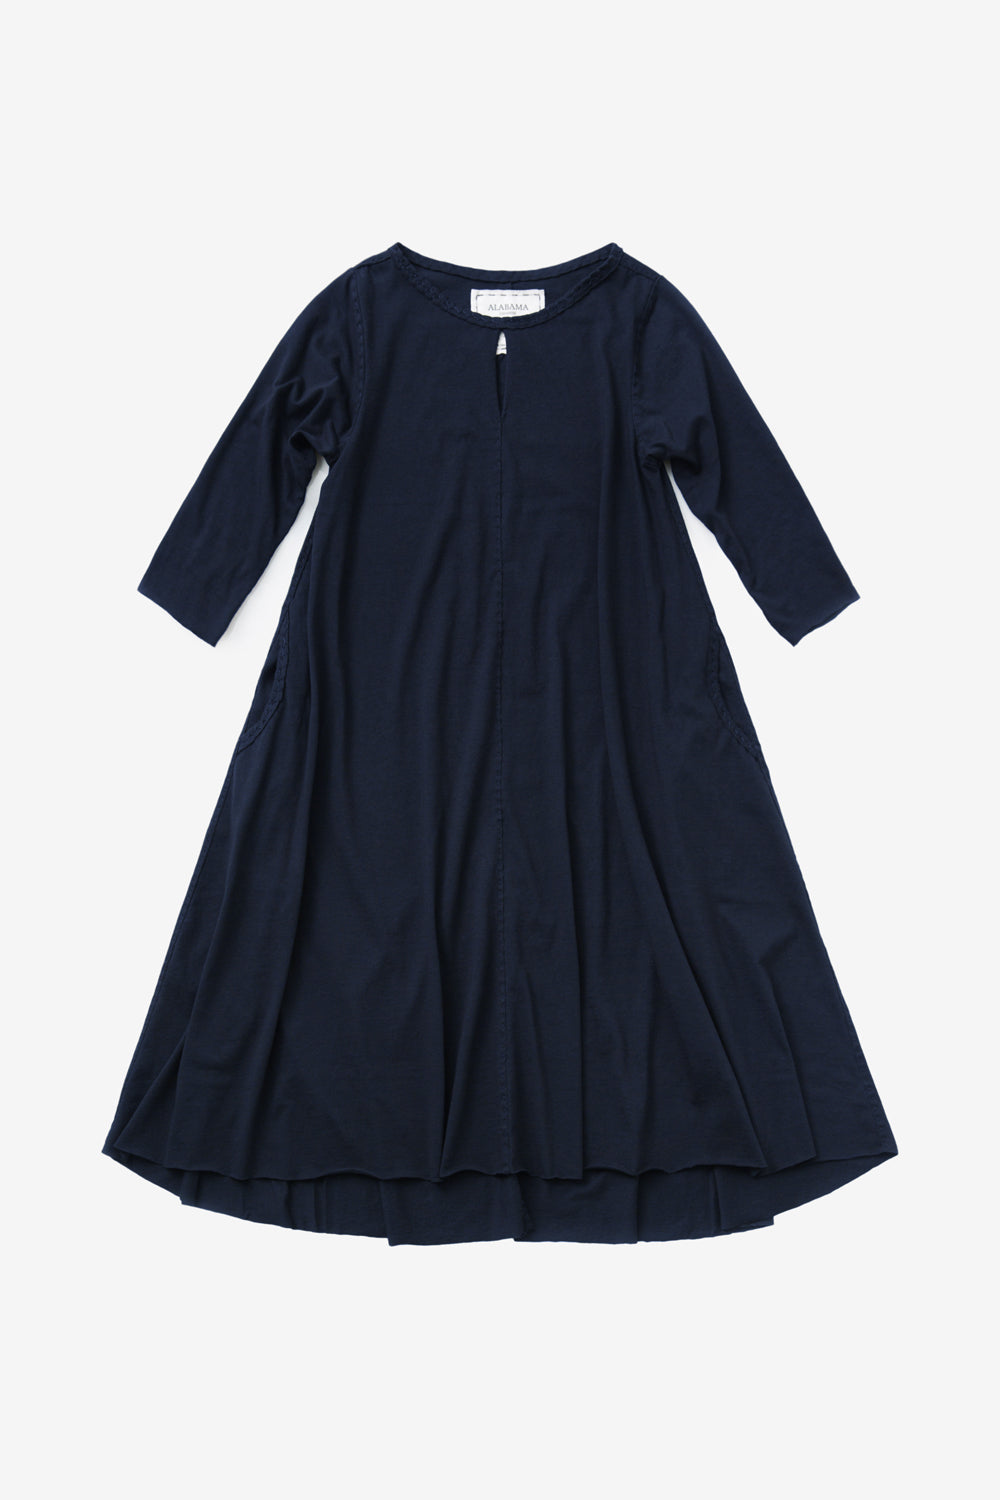 The School of Making Keyhole Dress Kit in Navy with Elbow Sleeves